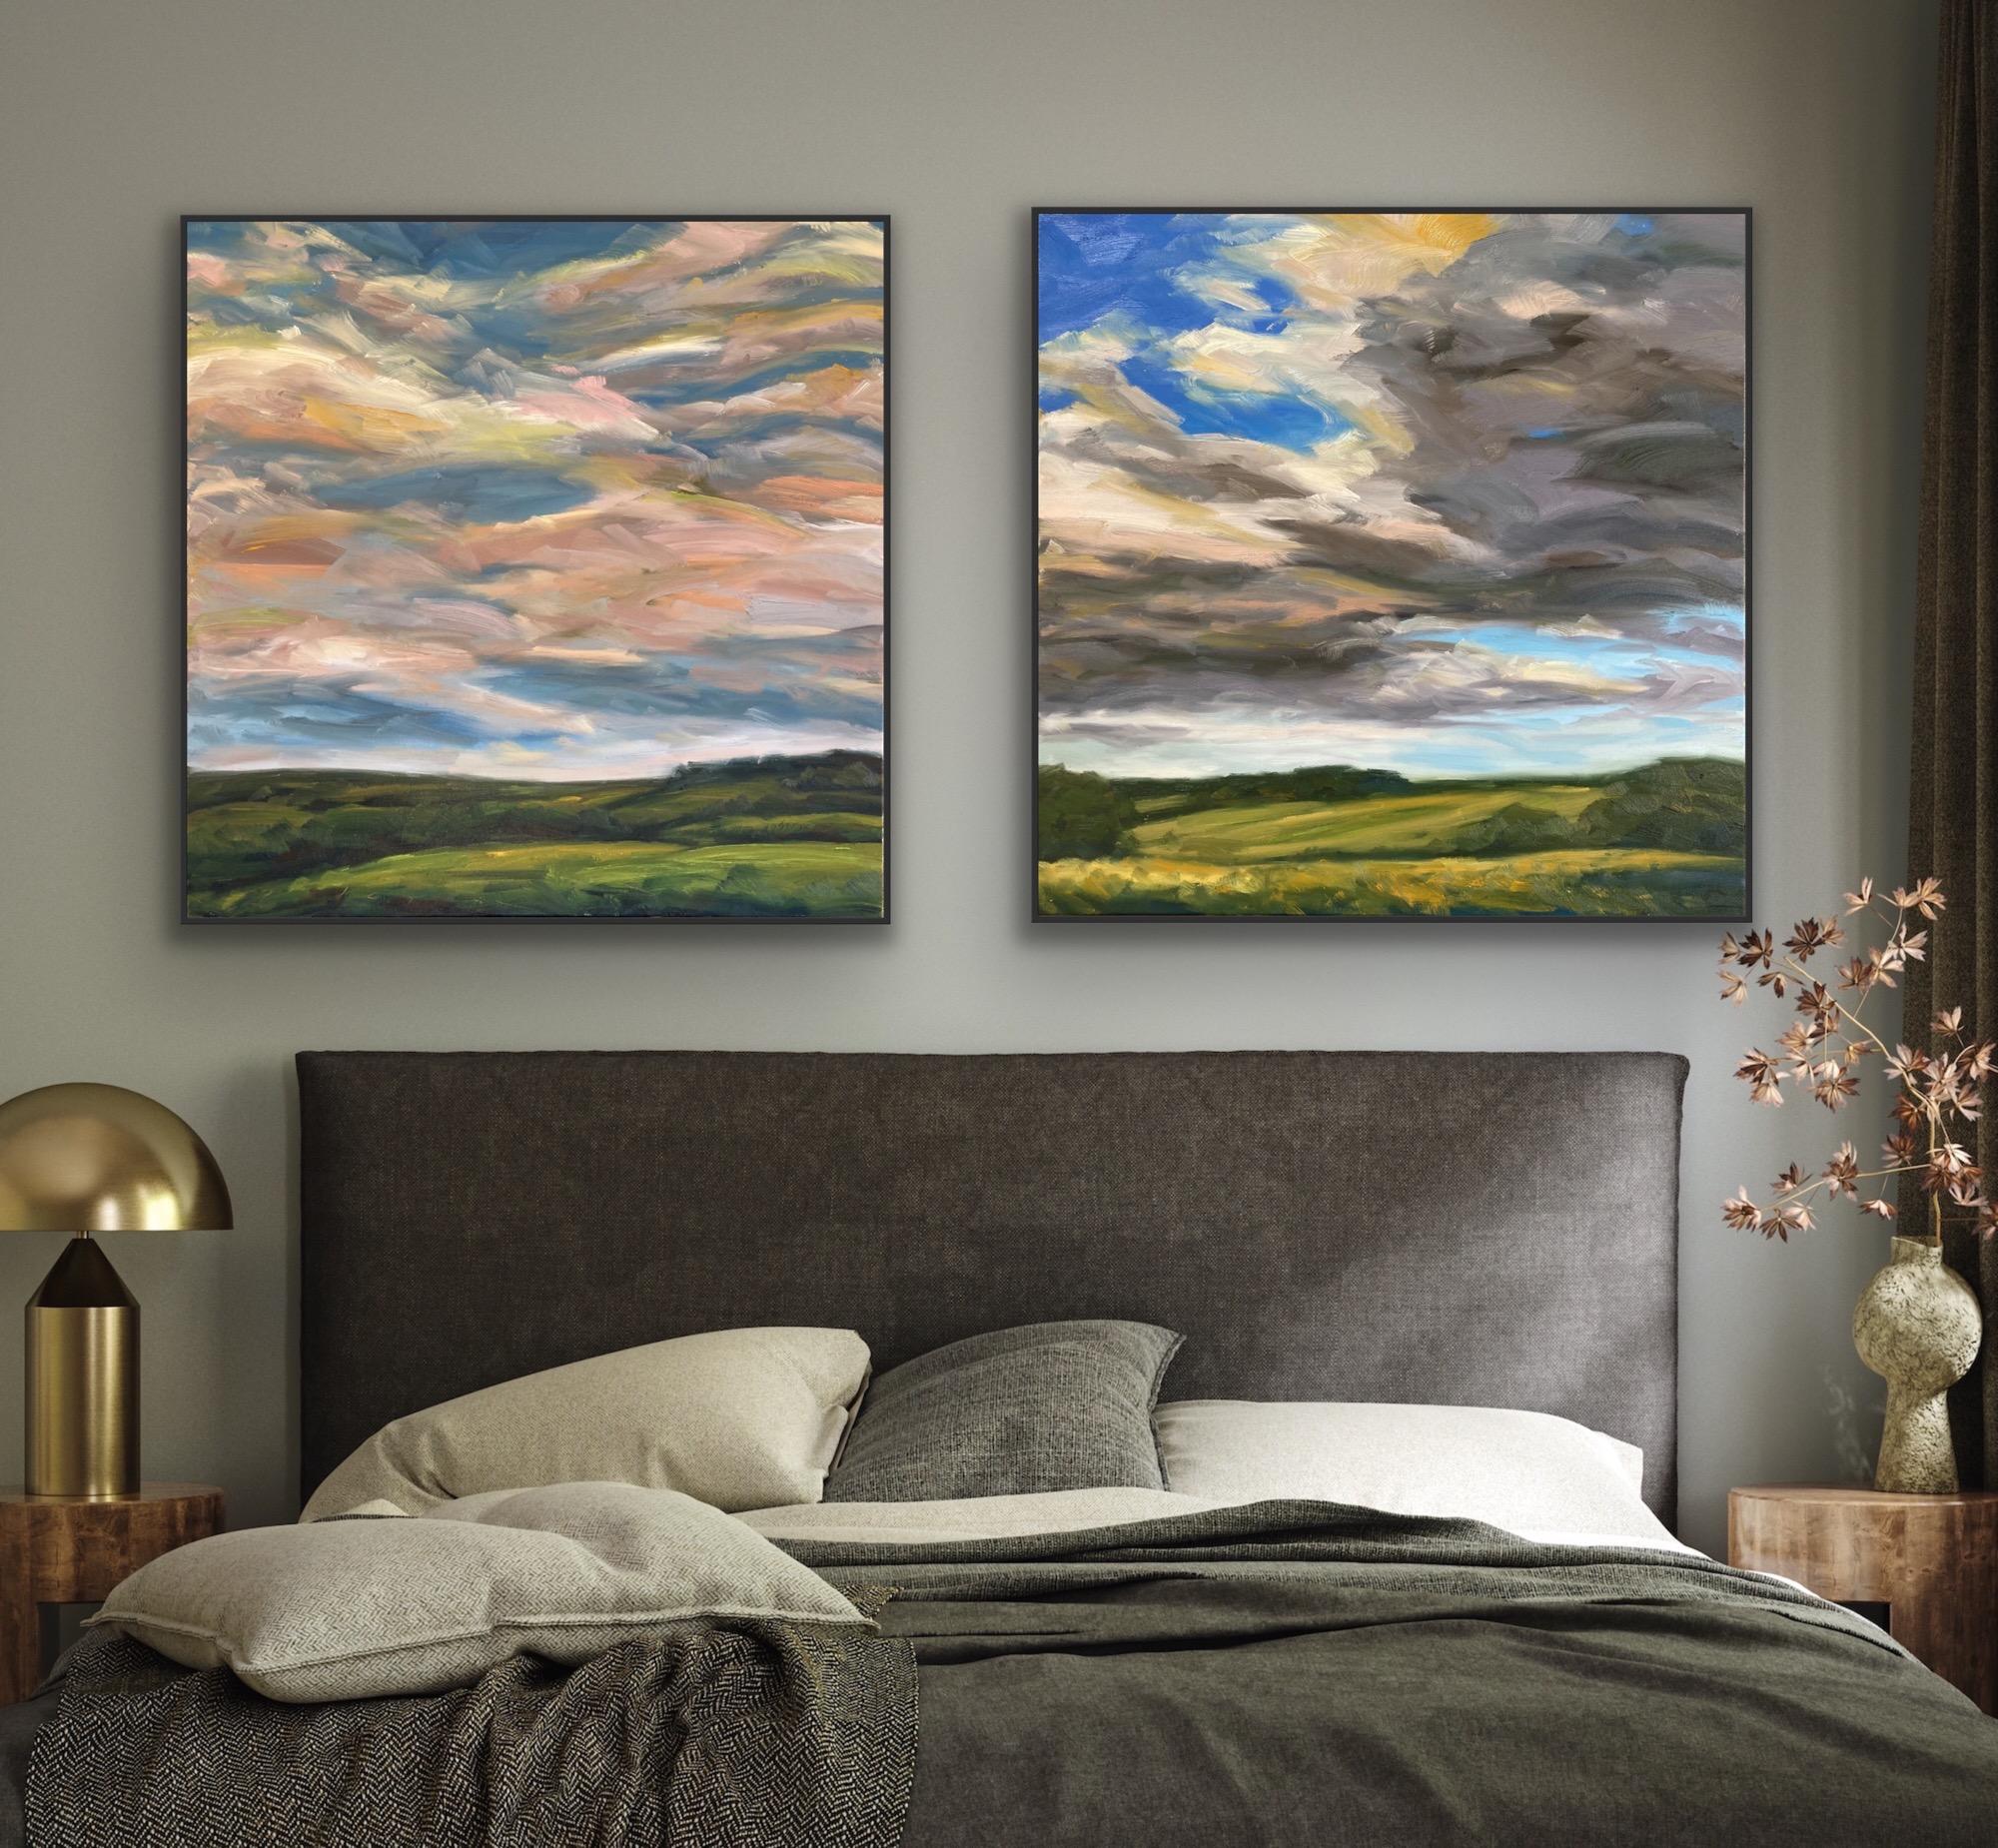 Sometimes I long to just fly up into a soft, summer sky - to float freely with the clouds on a warm, gentle breeze. Framed in a bespoke, hand-painted wooden frame.


Bring the feeling of a fresh, bright summer’s day into your home. This painting